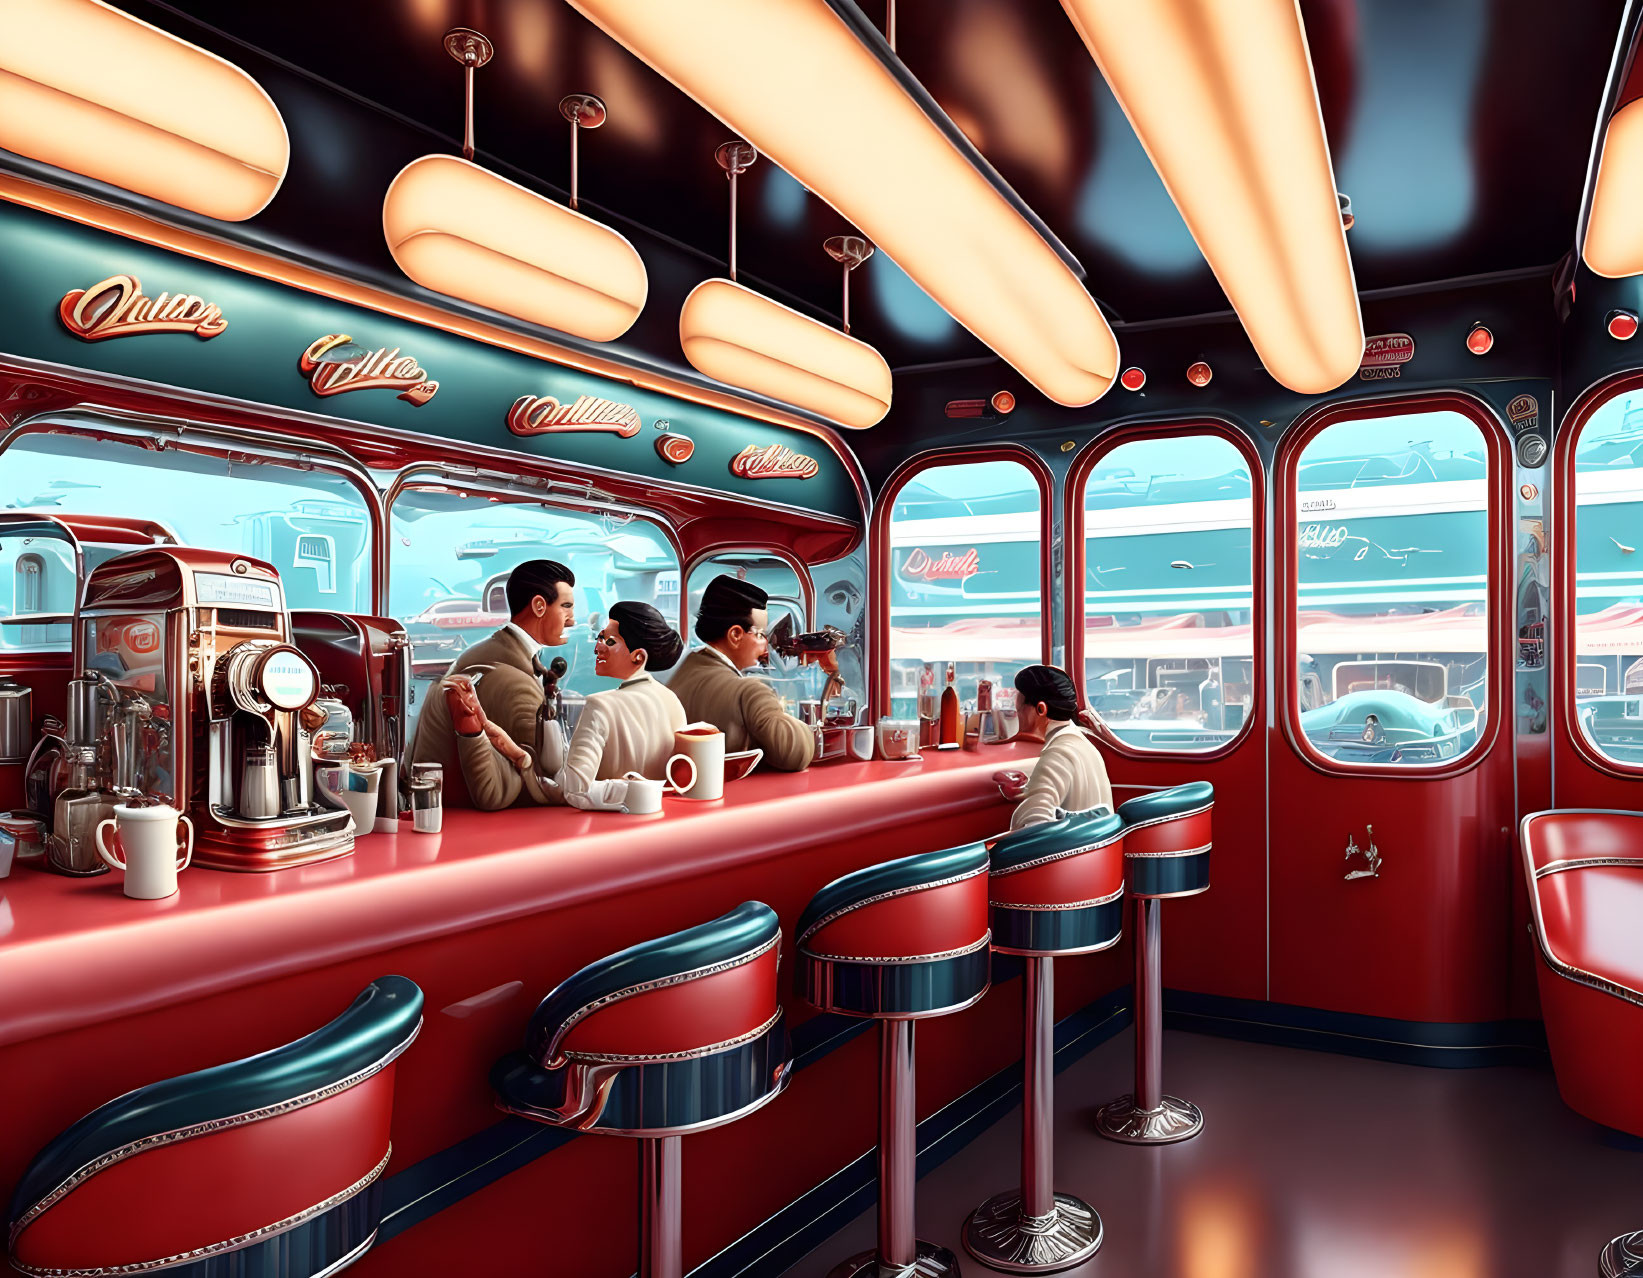 Vintage-style diner with patrons, bar stools, and vintage car view under warm lighting